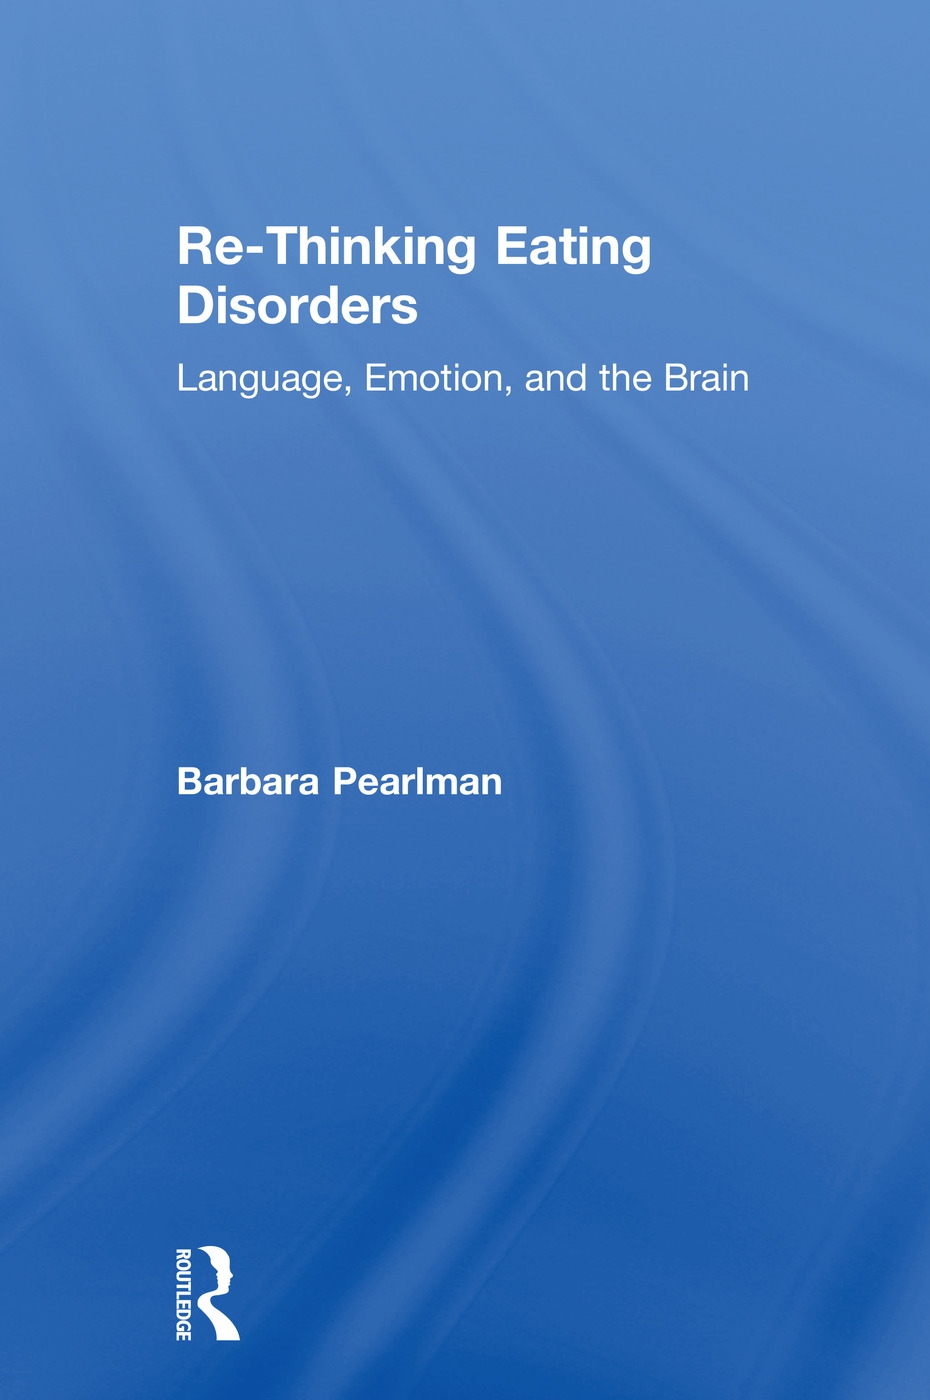 Re-Thinking Eating Disorders: Language, Emotion, and the Brain